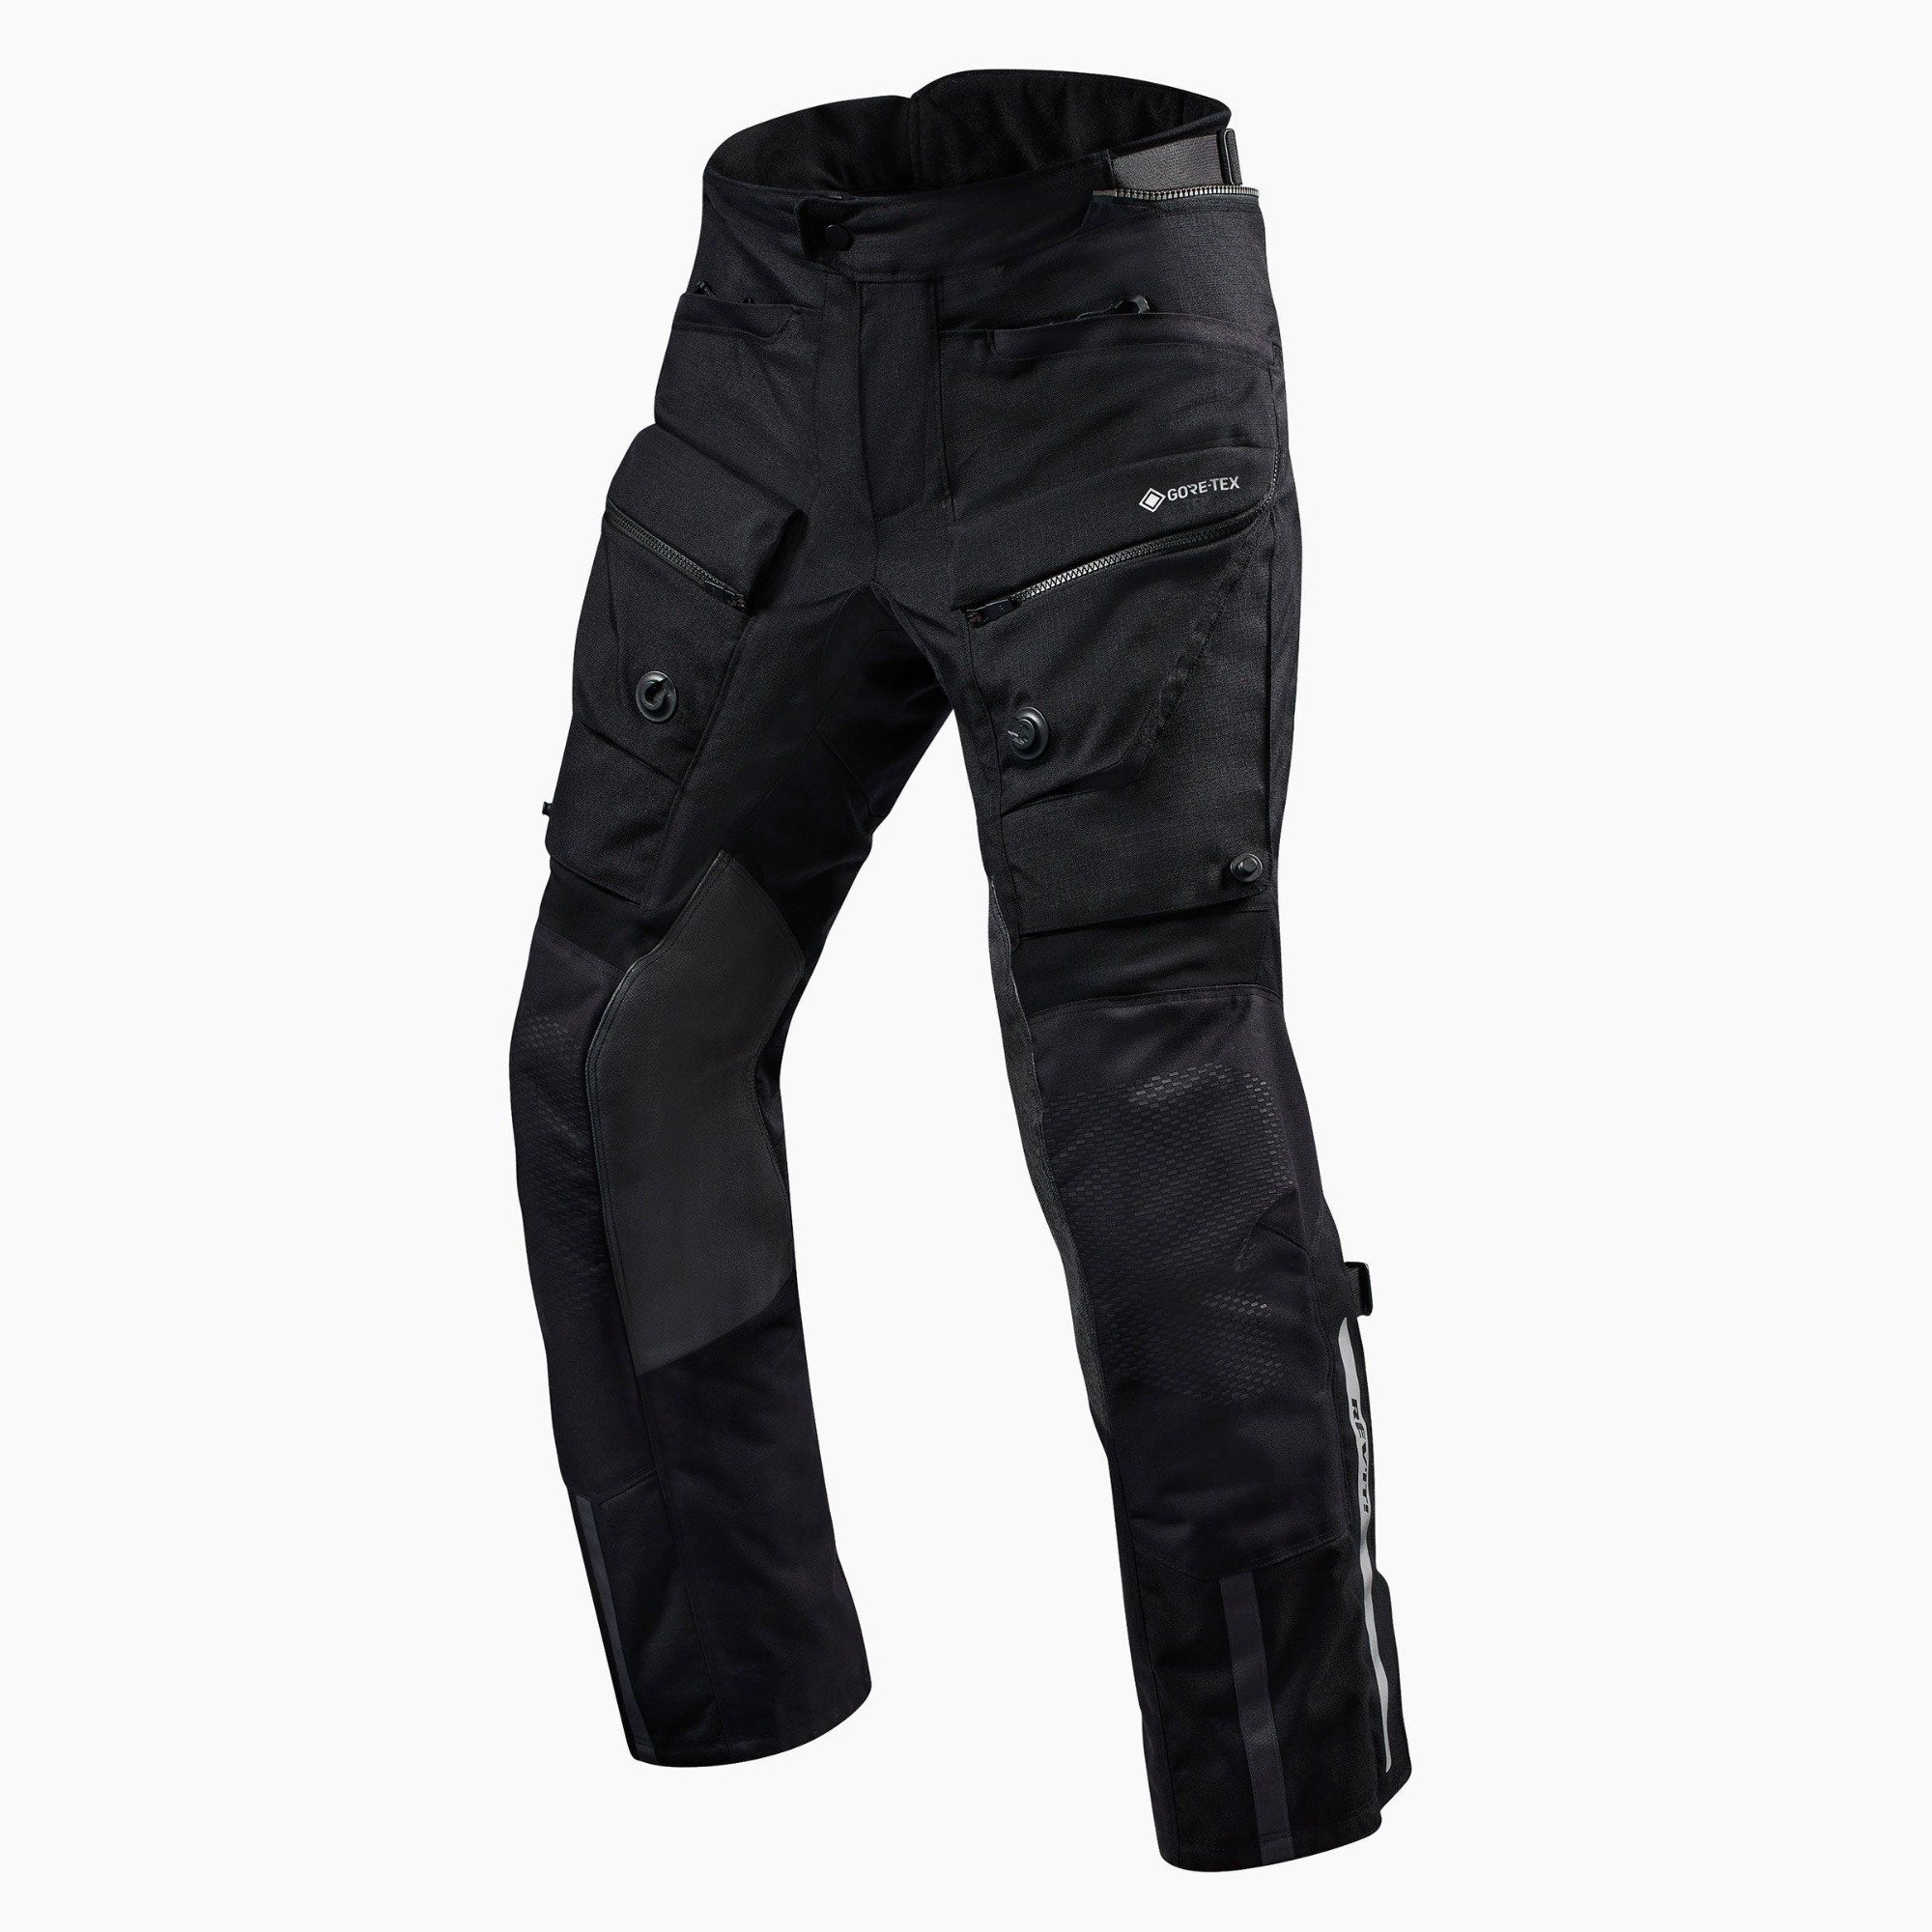 Image of REV'IT! Trousers Defender 3 GTX Black Standard Motorcycle Pants Size 2XL ID 8700001319836